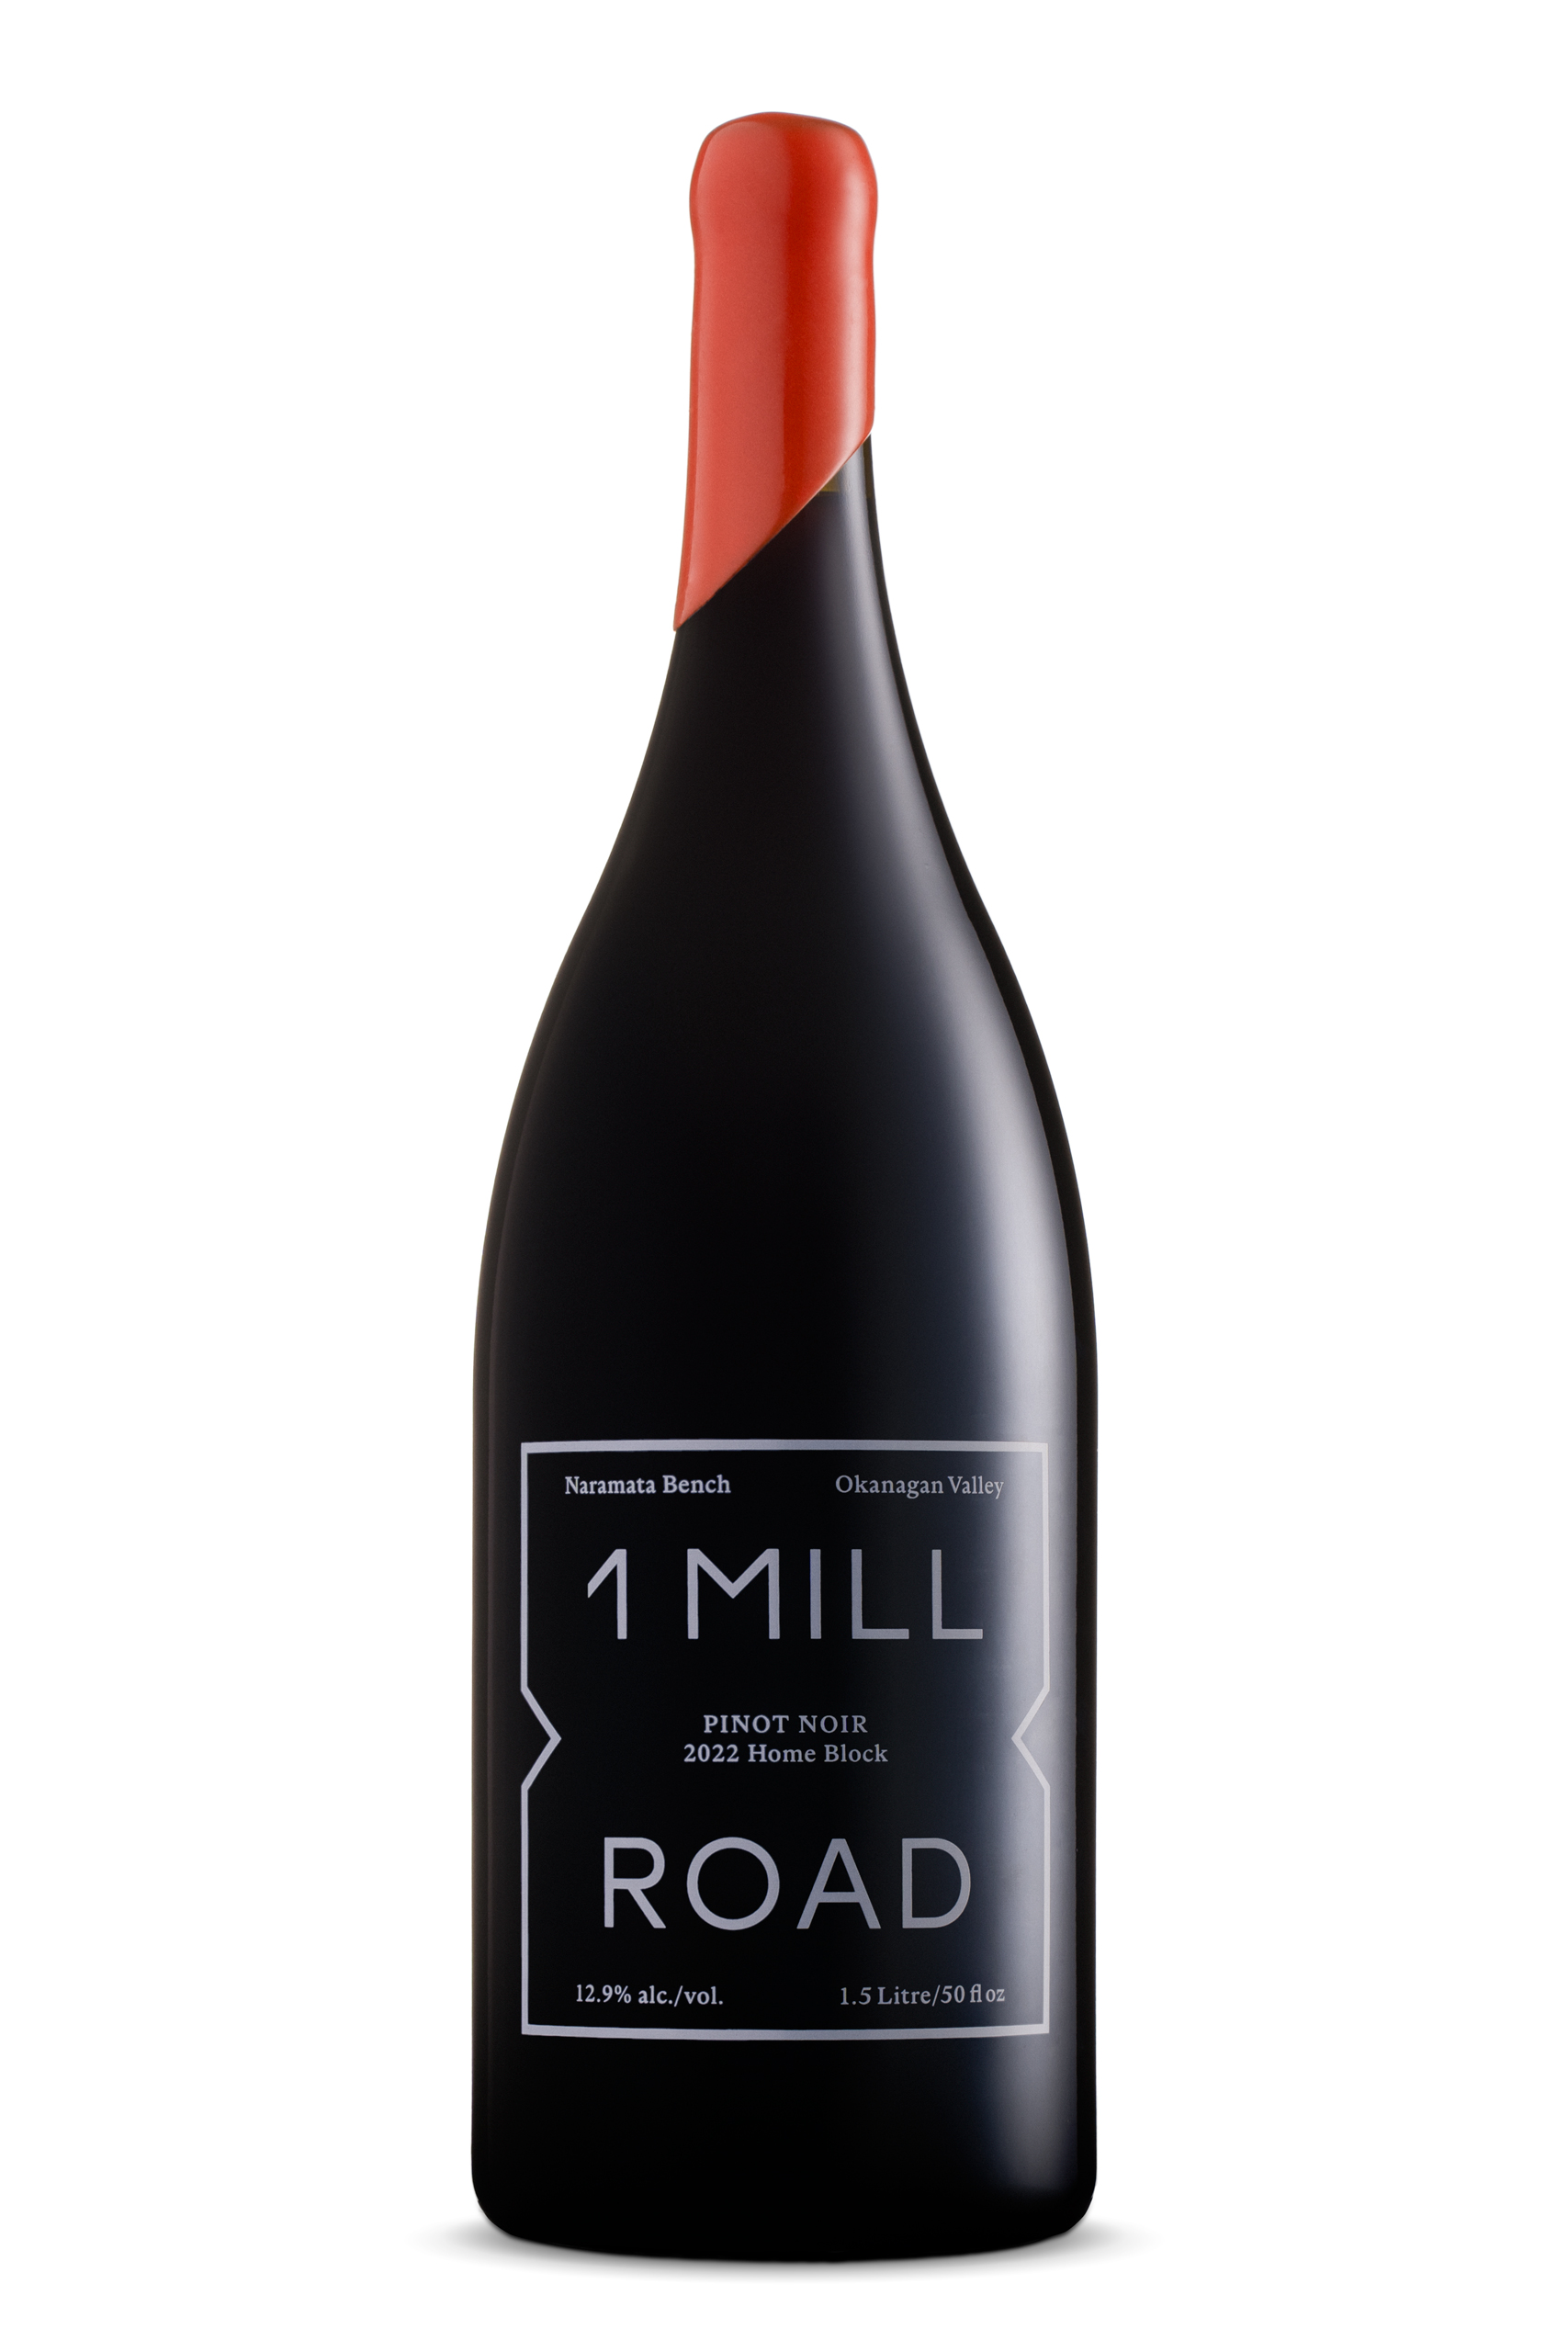 Bottle of 1 Mill Road 2022 Home Block Pinot Noir with red wax seal.